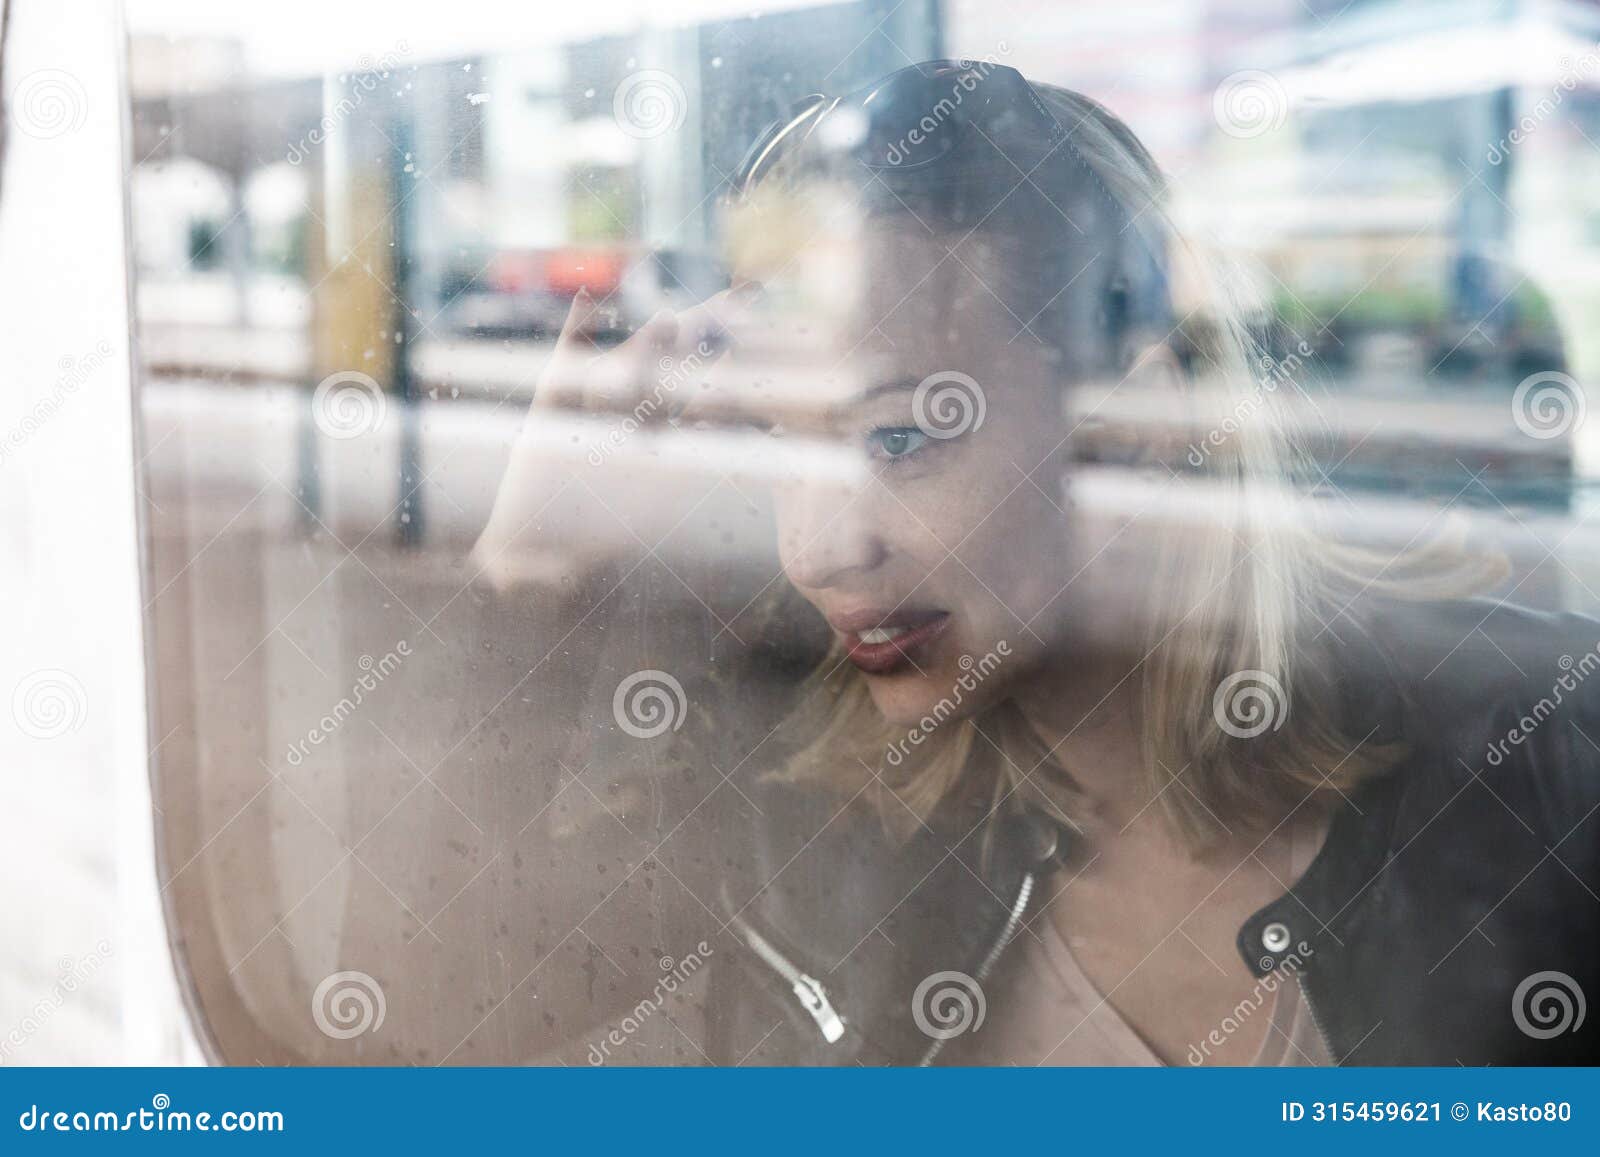 woman traveler contemplating outdoor view from window of train. young lady on commute travel to work sitting in bus or